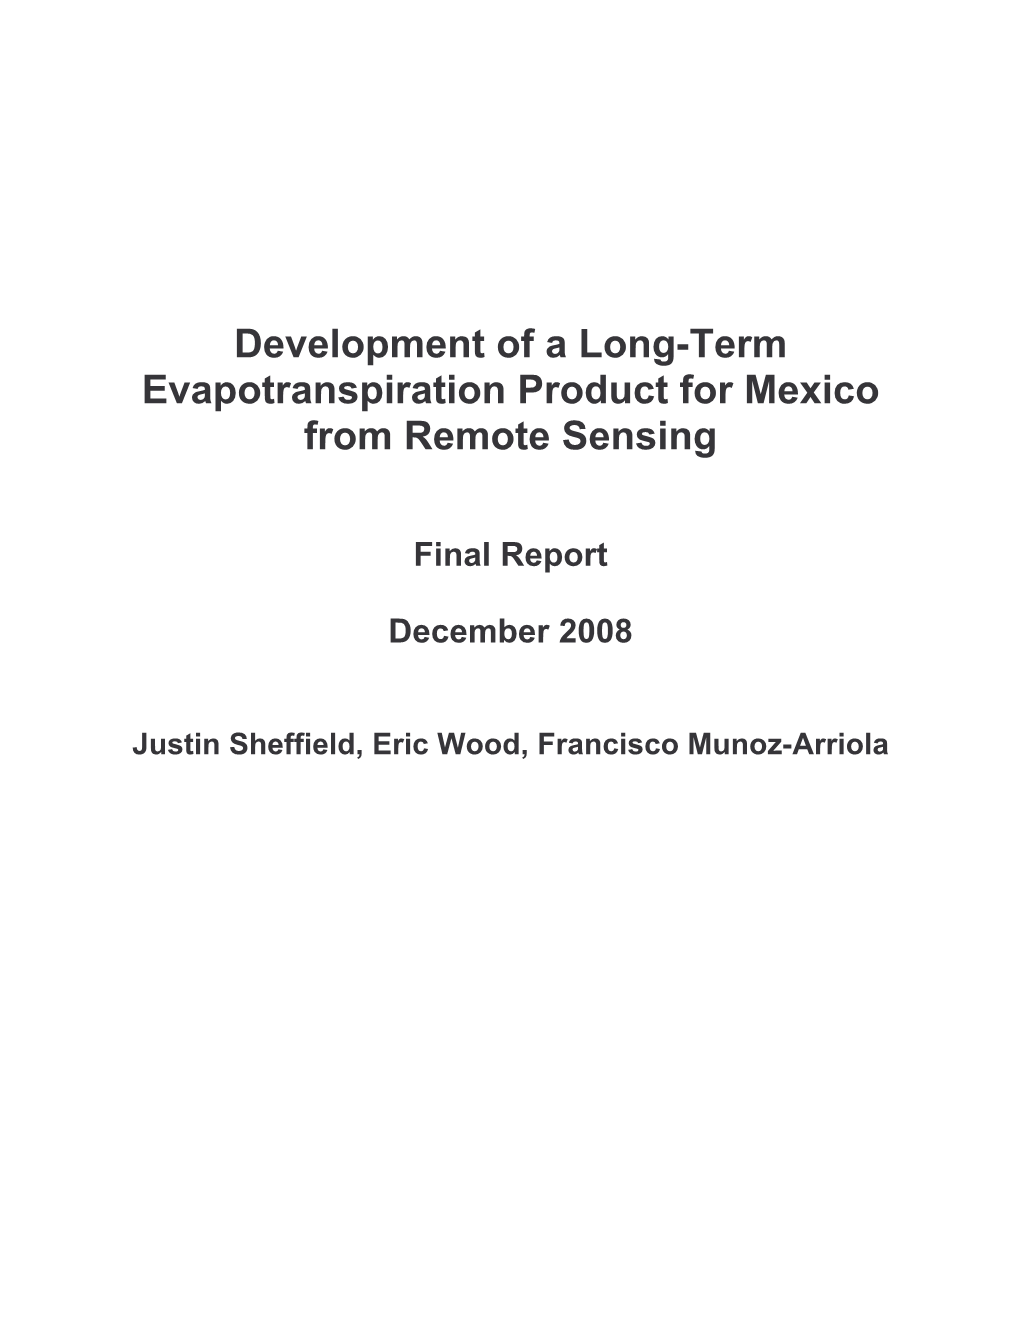 Development of a Long-Term Evapotranspiration Product for Mexico from Remote Sensing